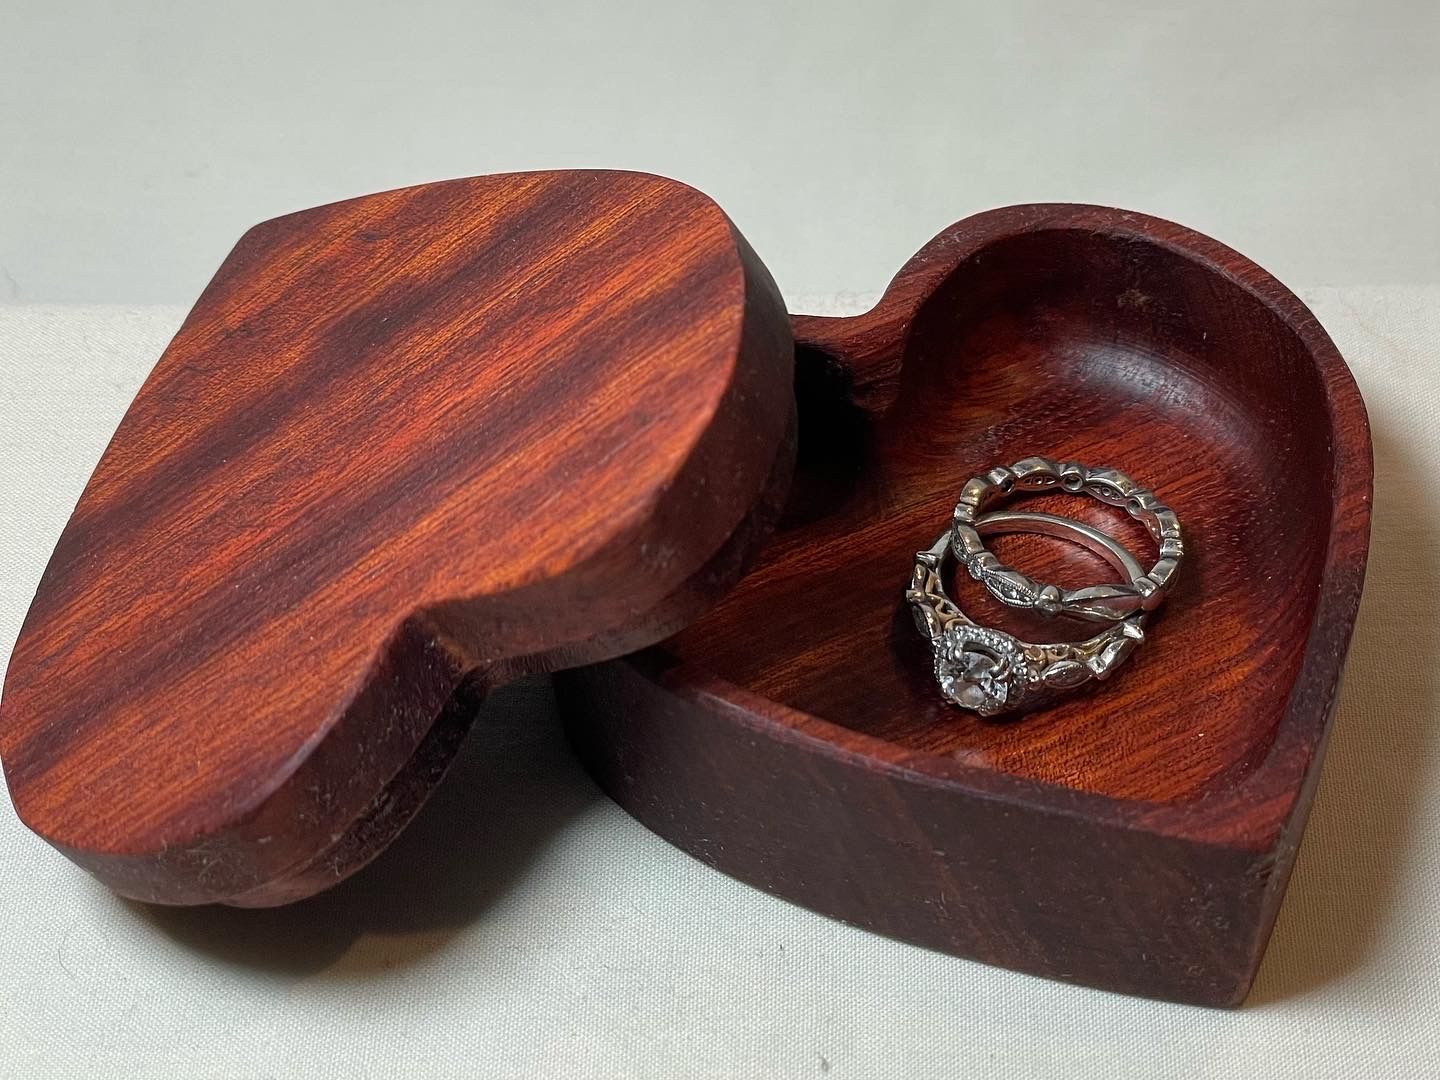 Two rings are in a heart shaped wooden box.